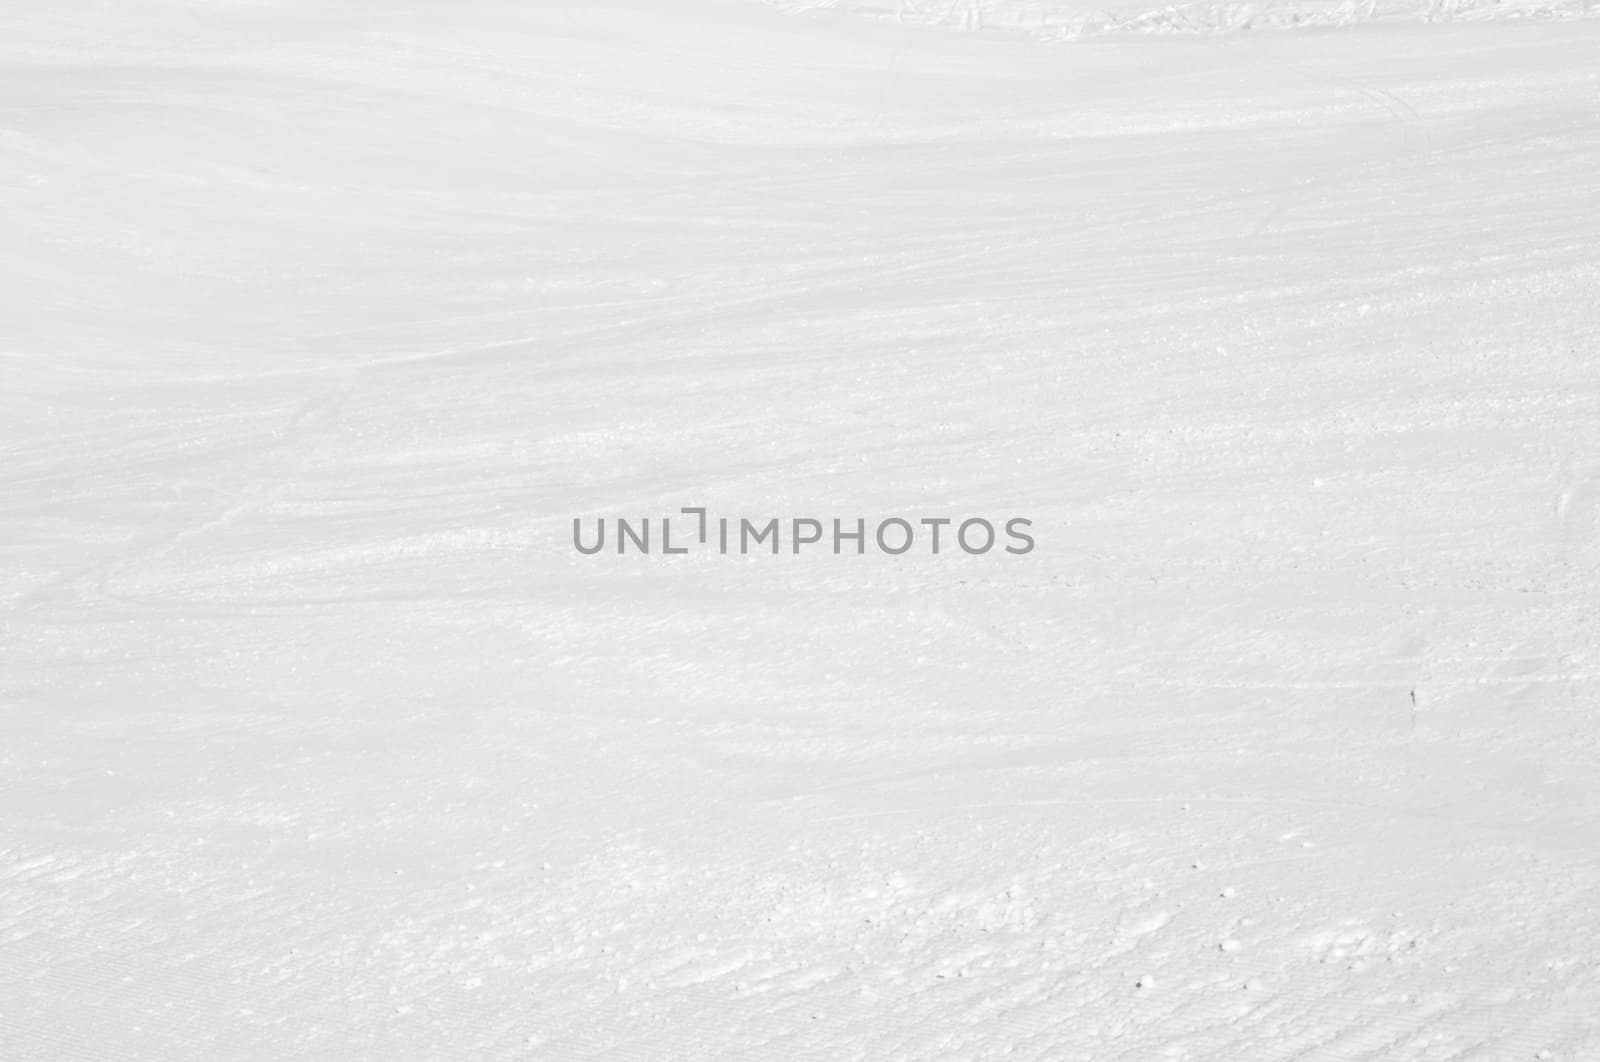 Clean white snowy background with faint ski tracks